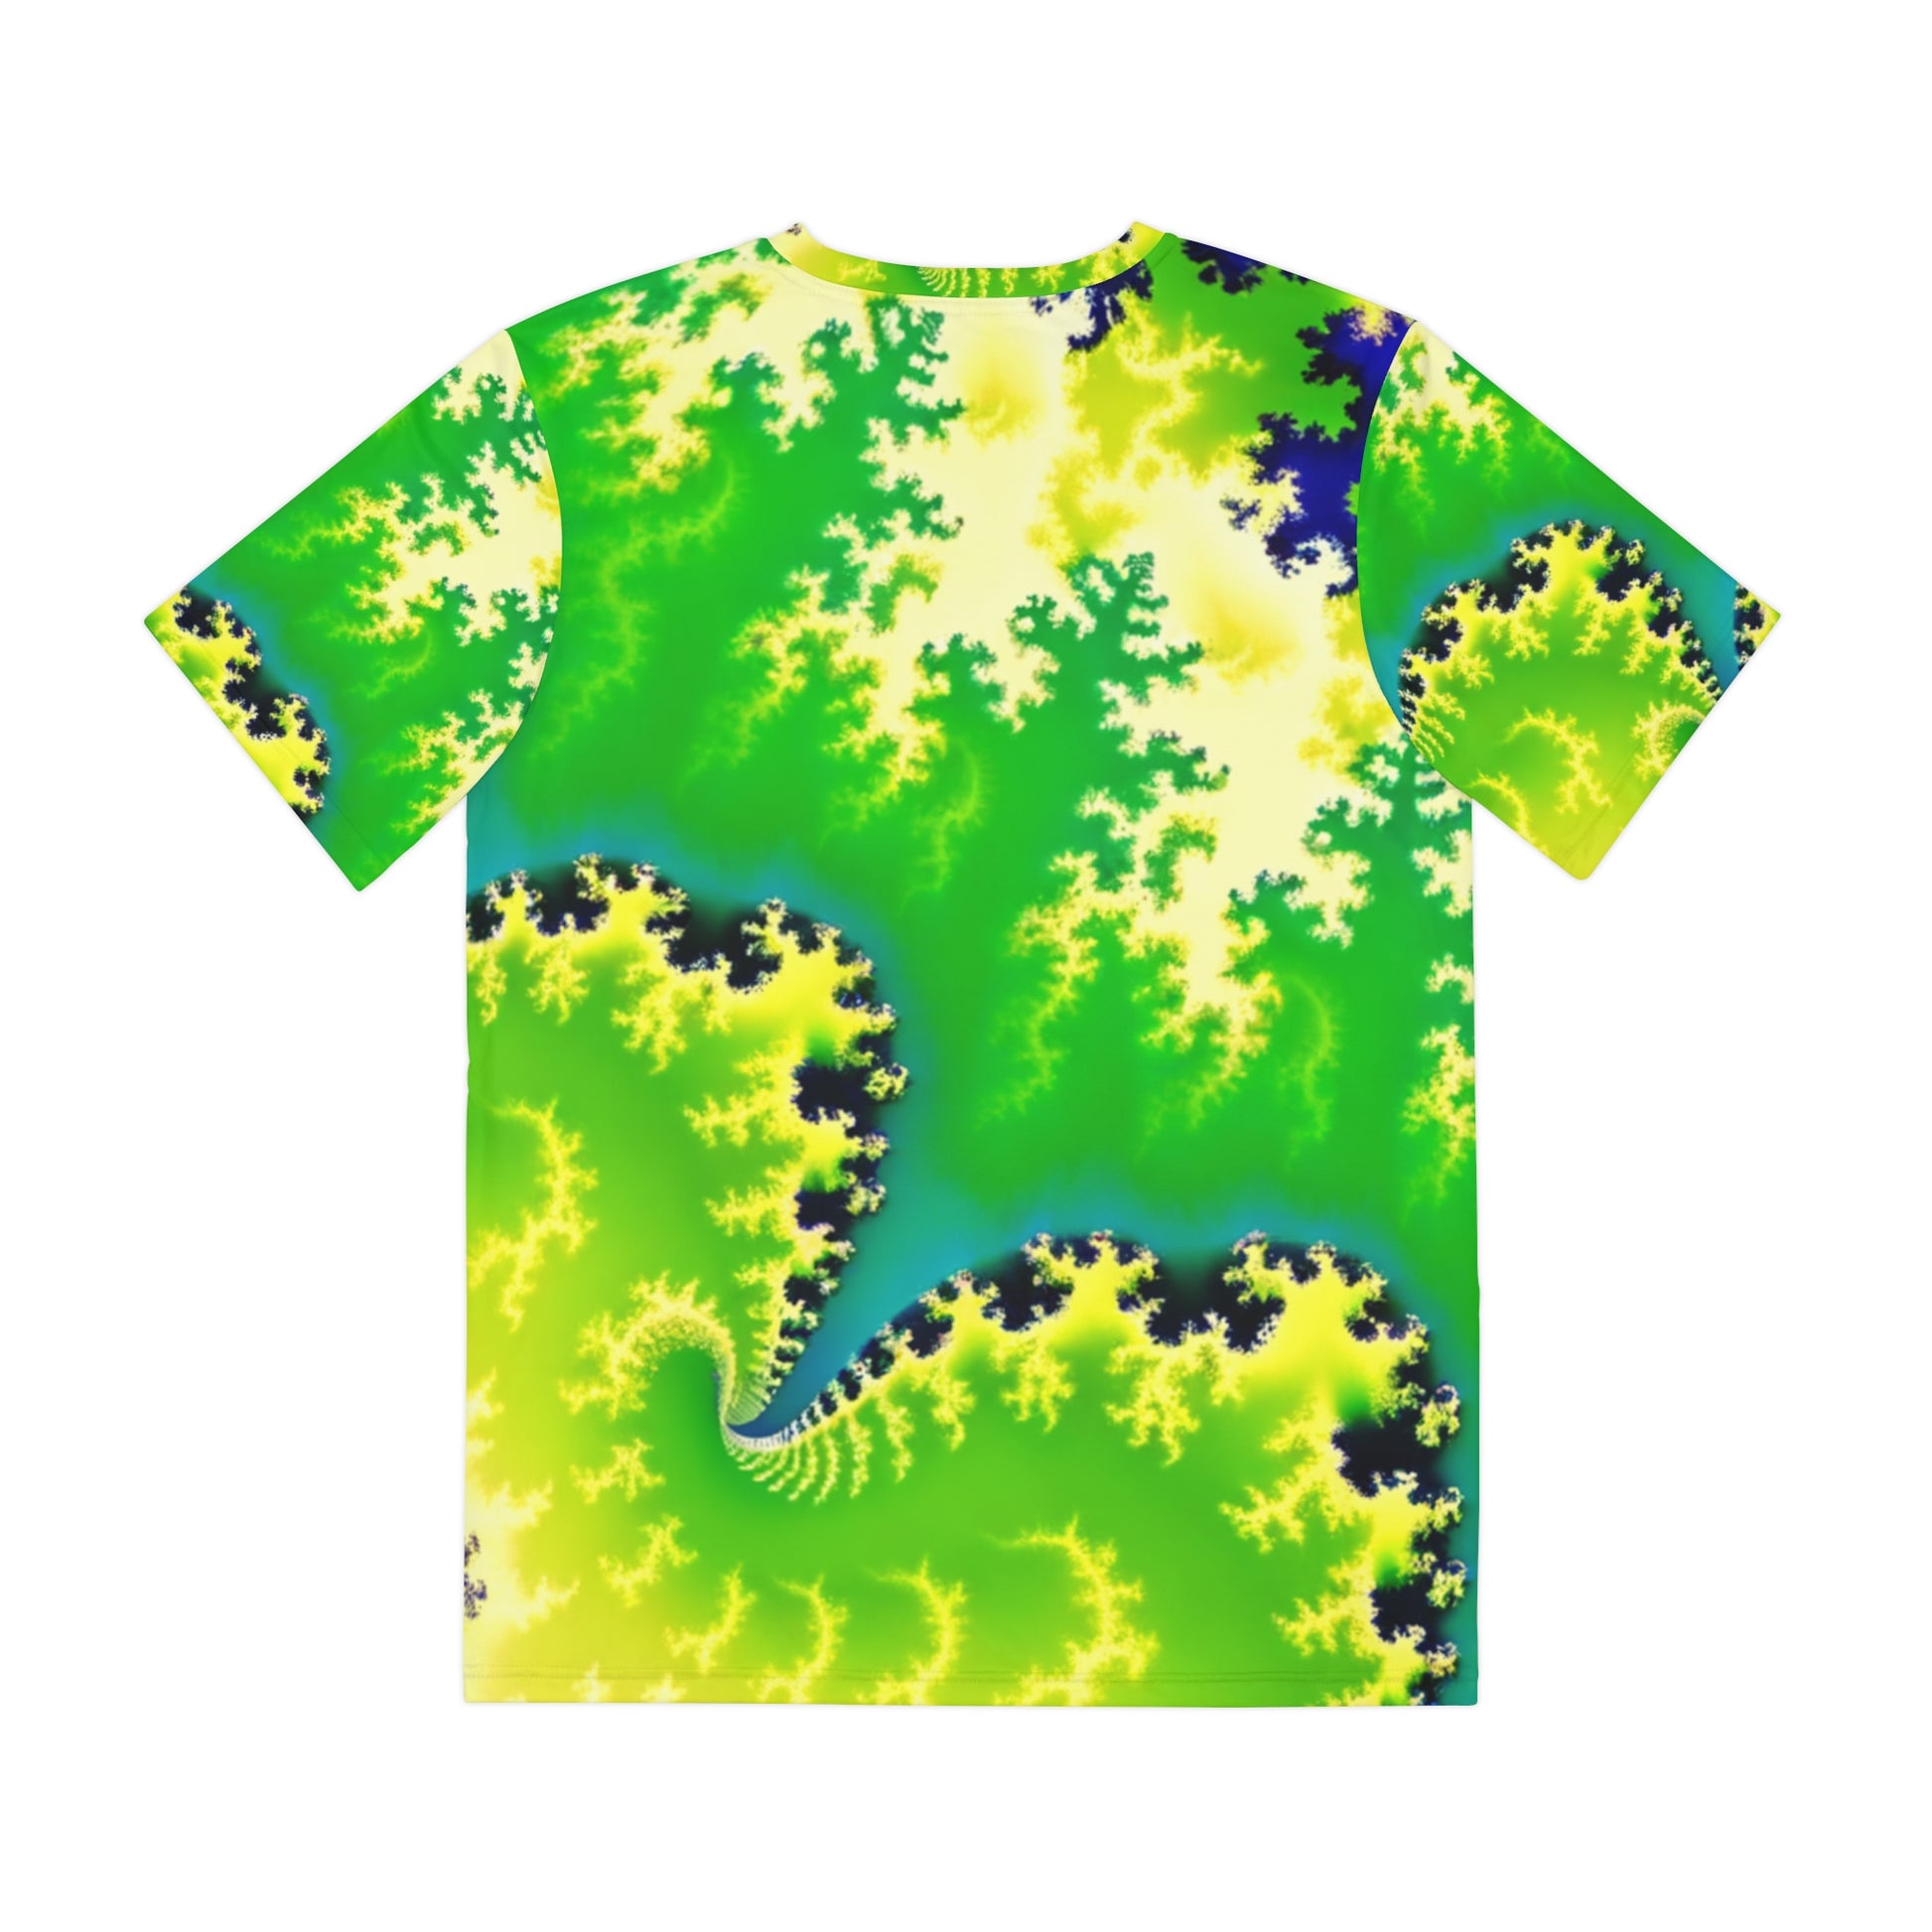 Back view of the Psychedelic Serpentine Fractal Fusion Crewneck Pullover All-Over Print Short-Sleeved Shirt green yellow blue black psychedelic pattern 